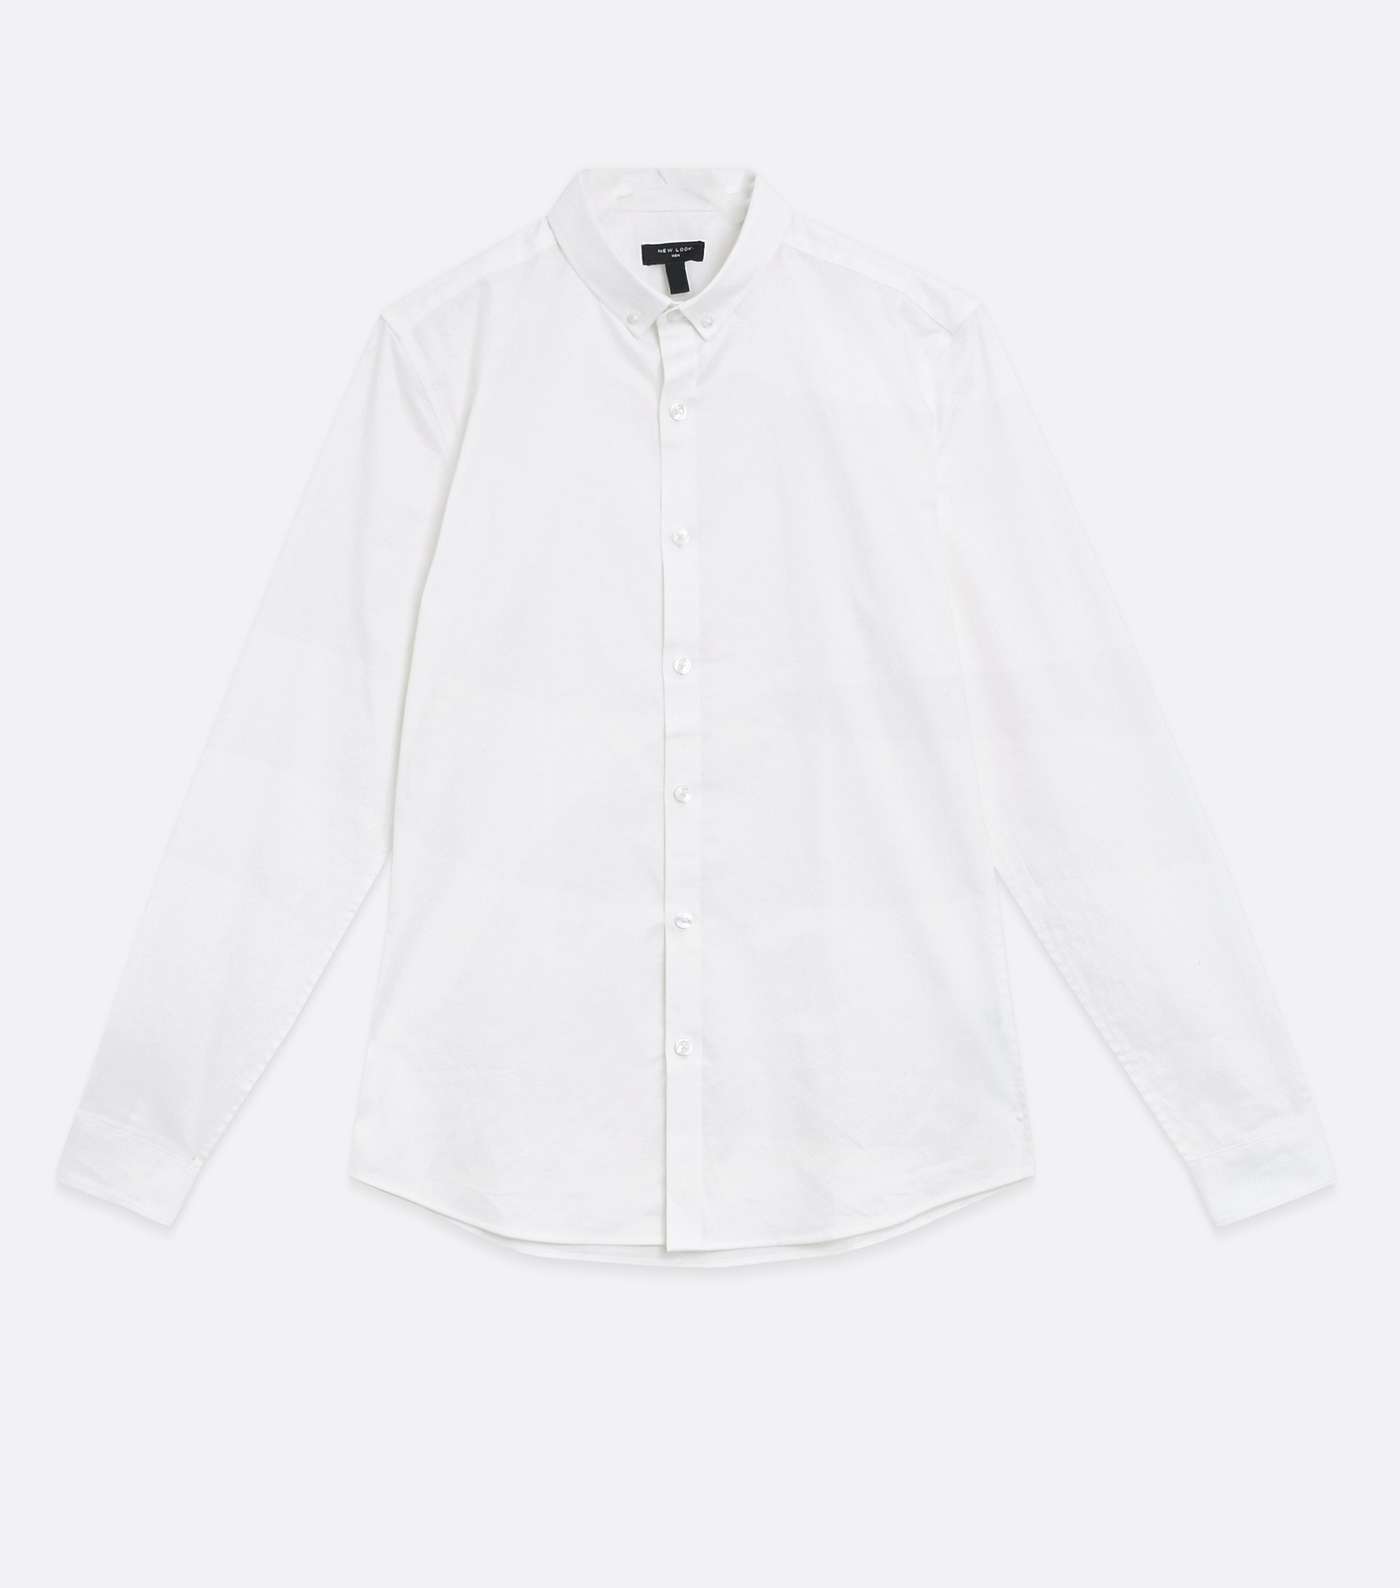 White Muscle Fit Oxford Shirt Image 5